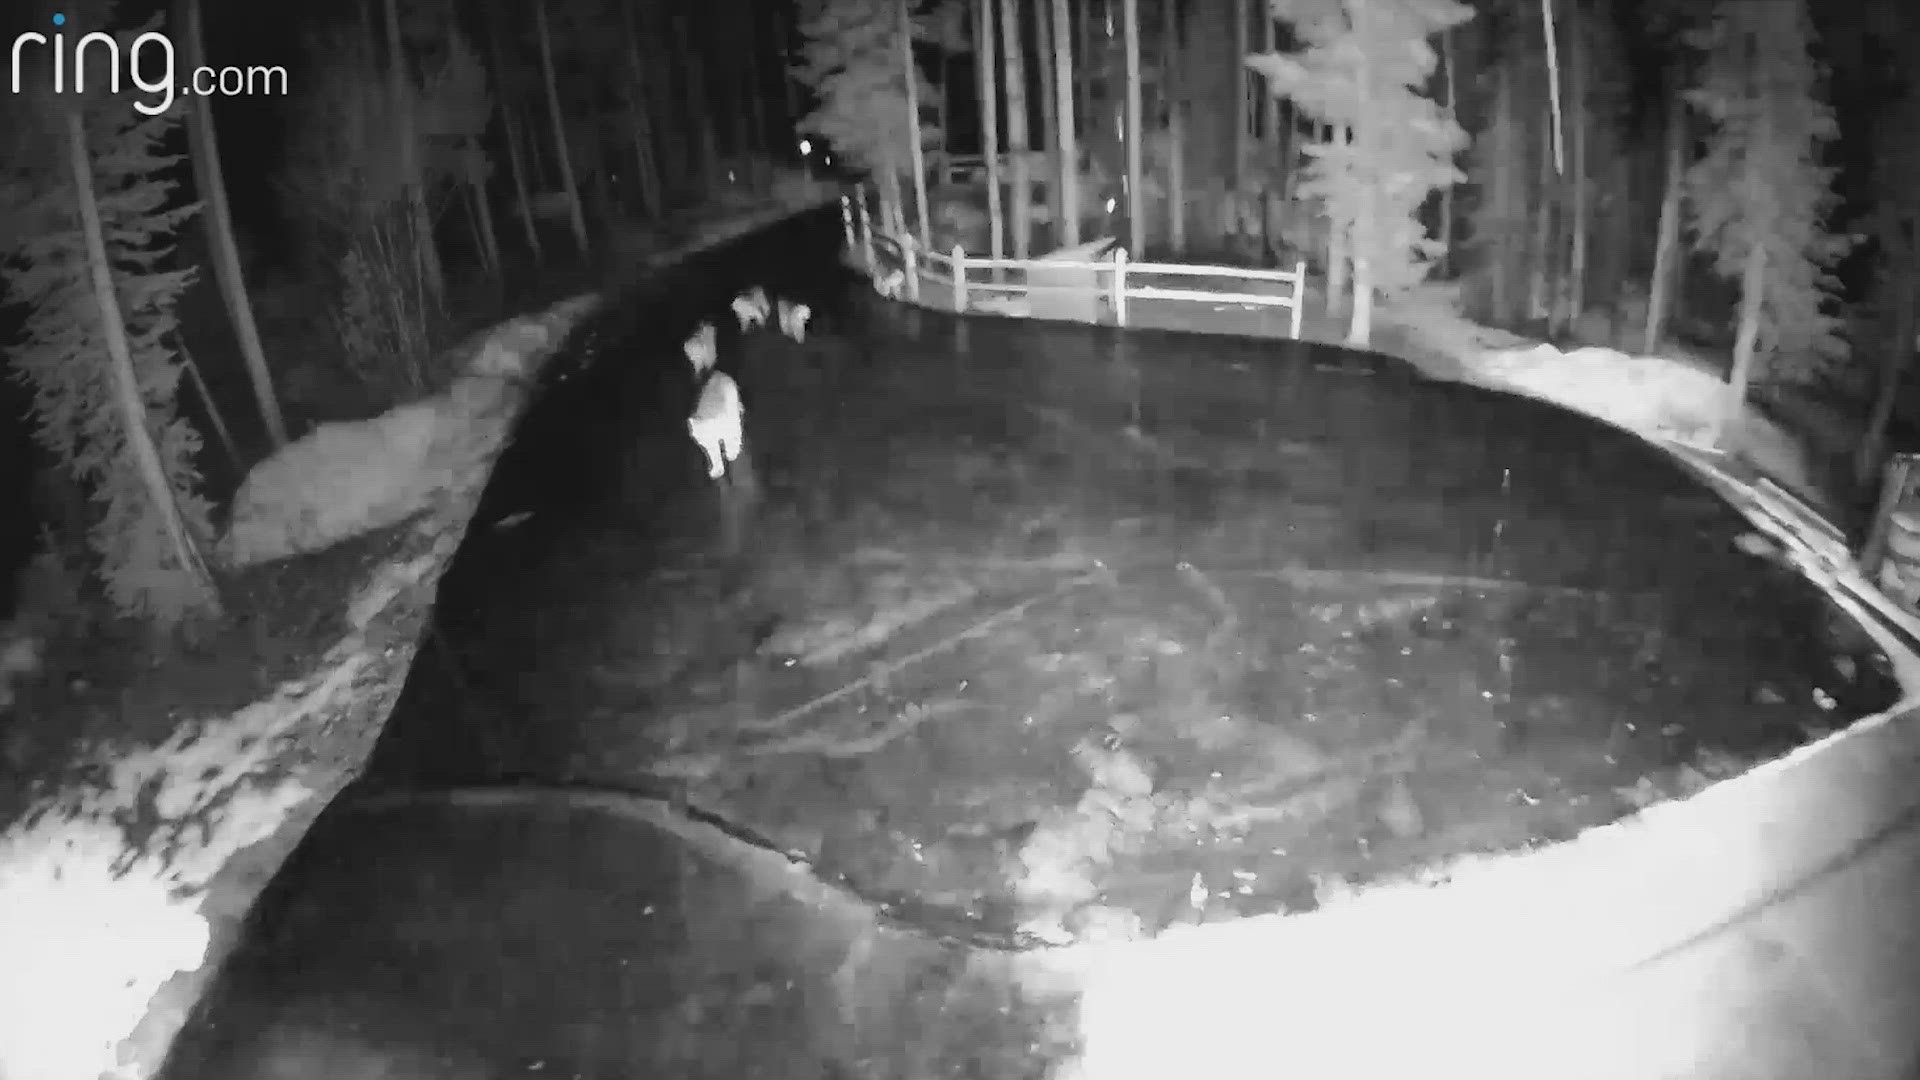 A resident in Breckenridge, Colorado, captured a pack of mountain lions crossing his driveway on a Ring floodlight camera.